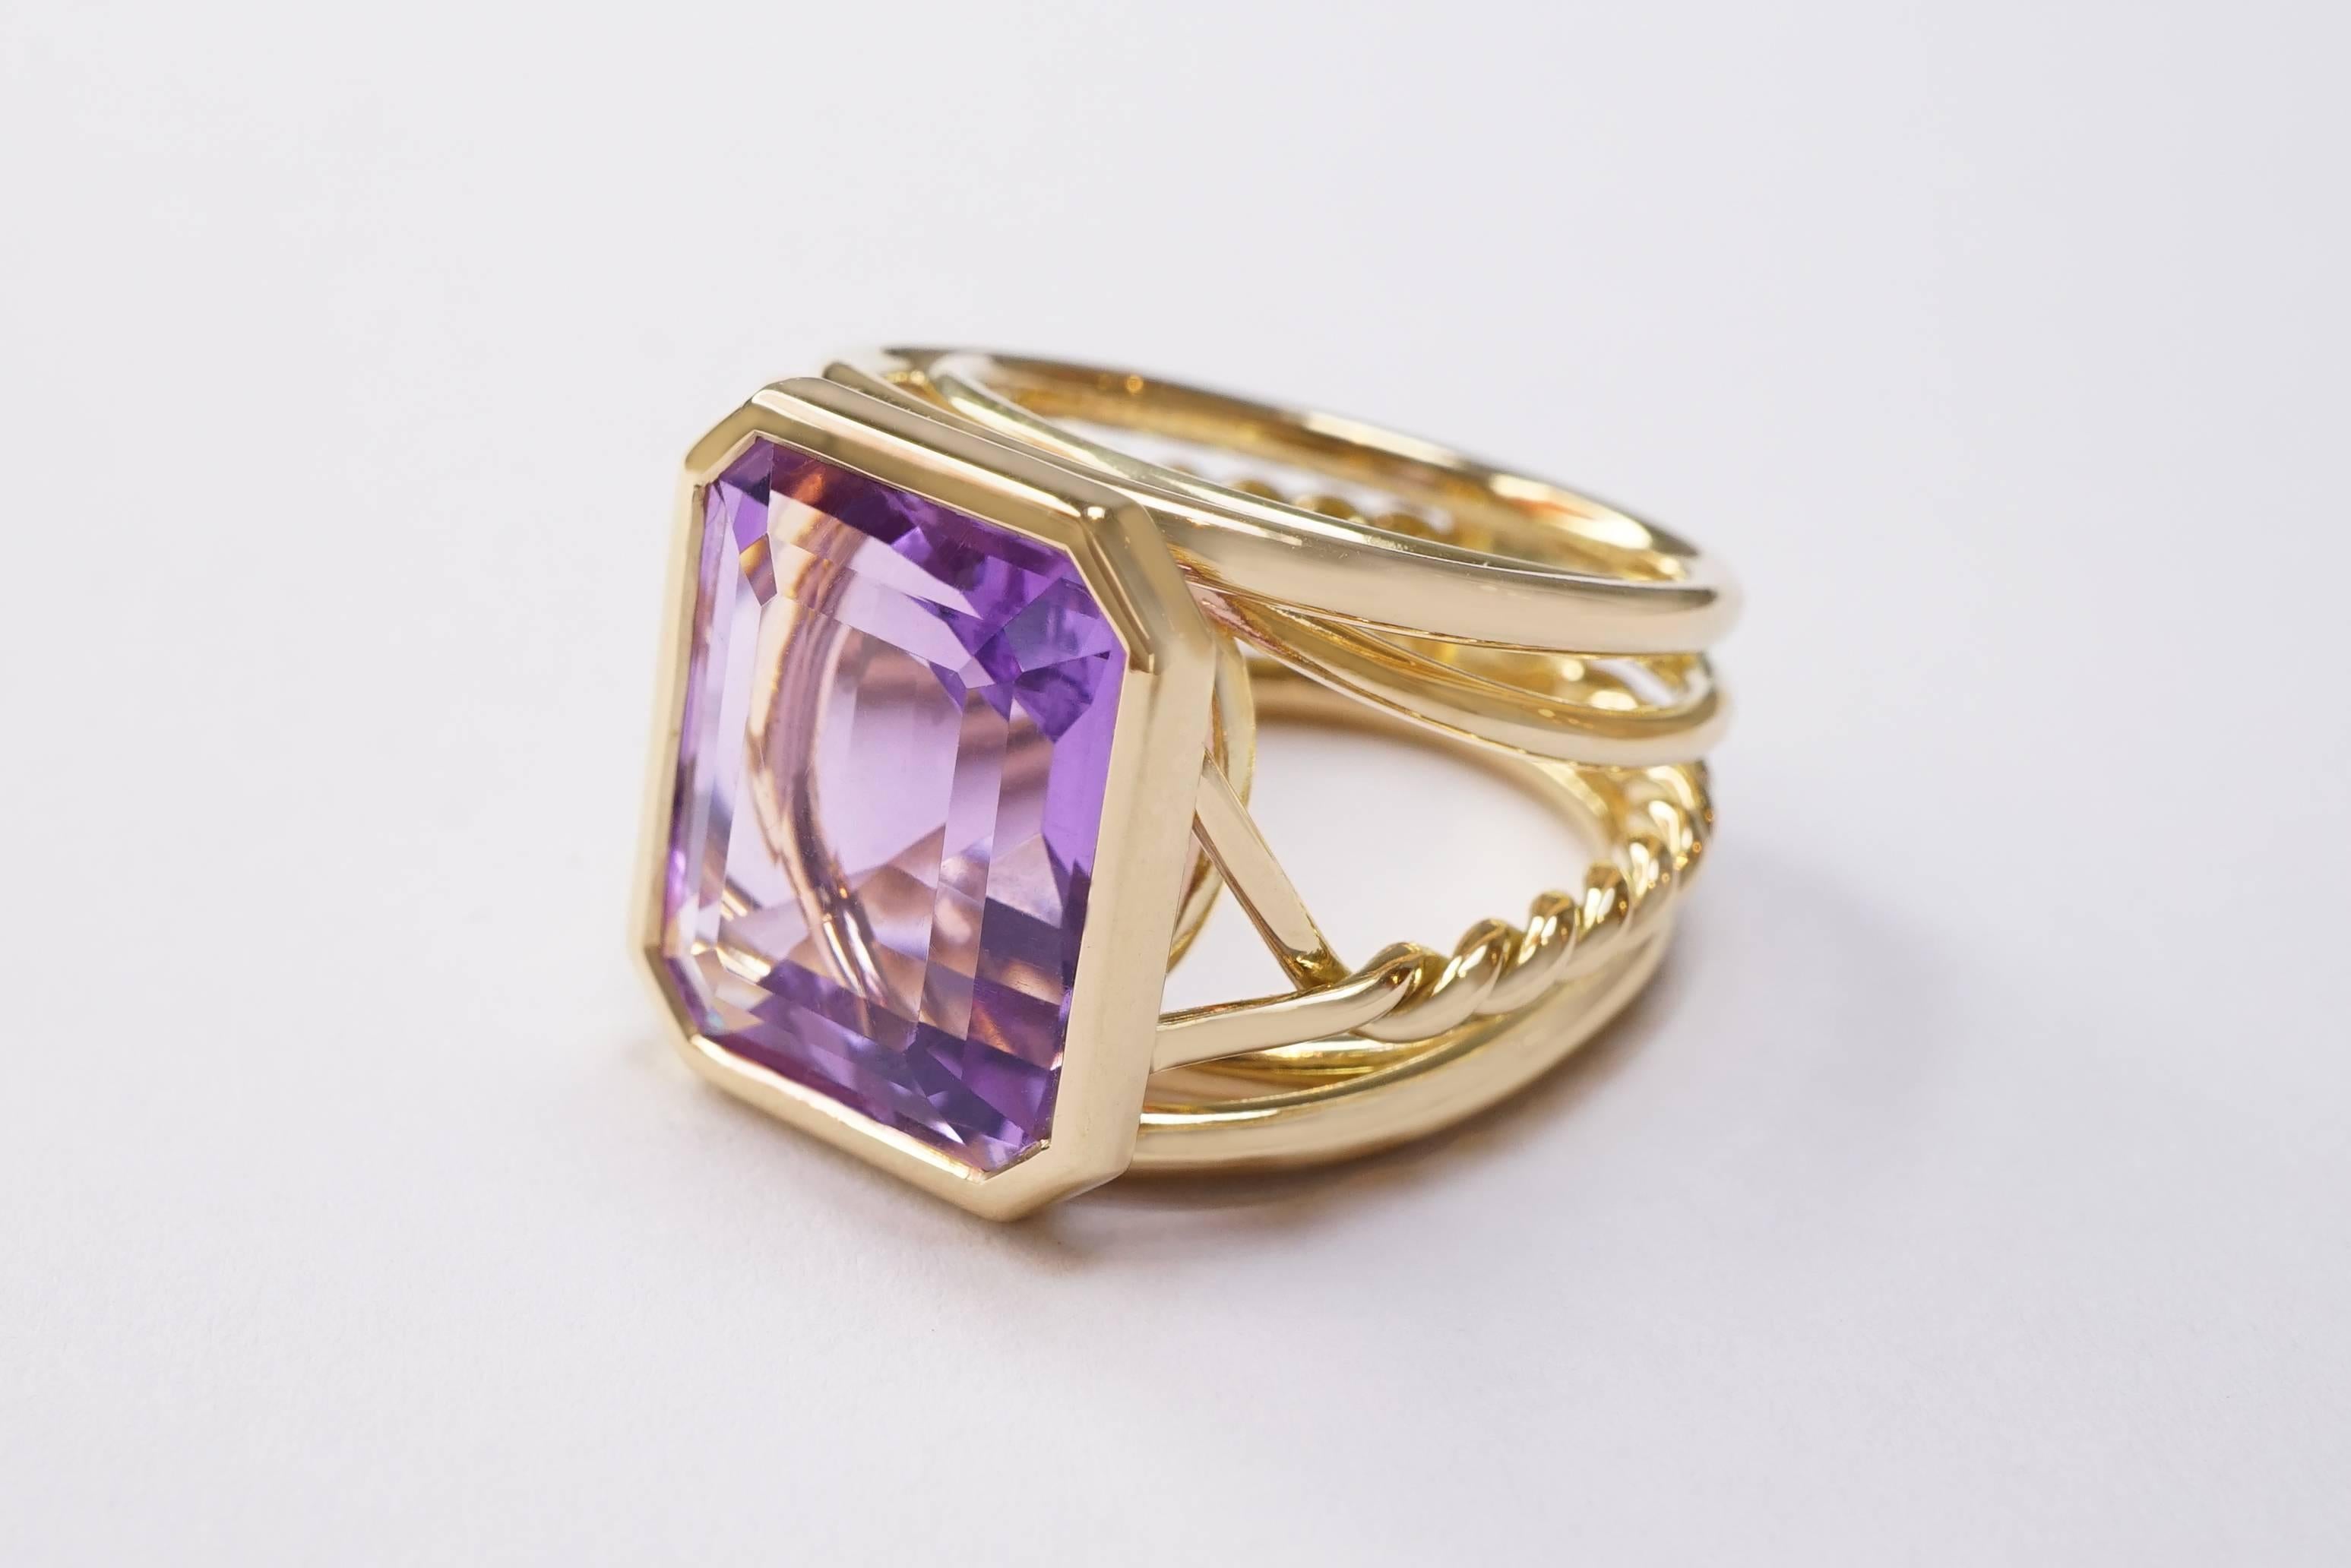 Coralie Van Caloen 18 Carat Yellow Gold Amethyst Torsadé Band Ring is entirely hand made and forged in Belgium by experts goldsmiths therefore it is a very unique piece. The Amethyst has a bright and lively purple colour and is mounted on an elegant